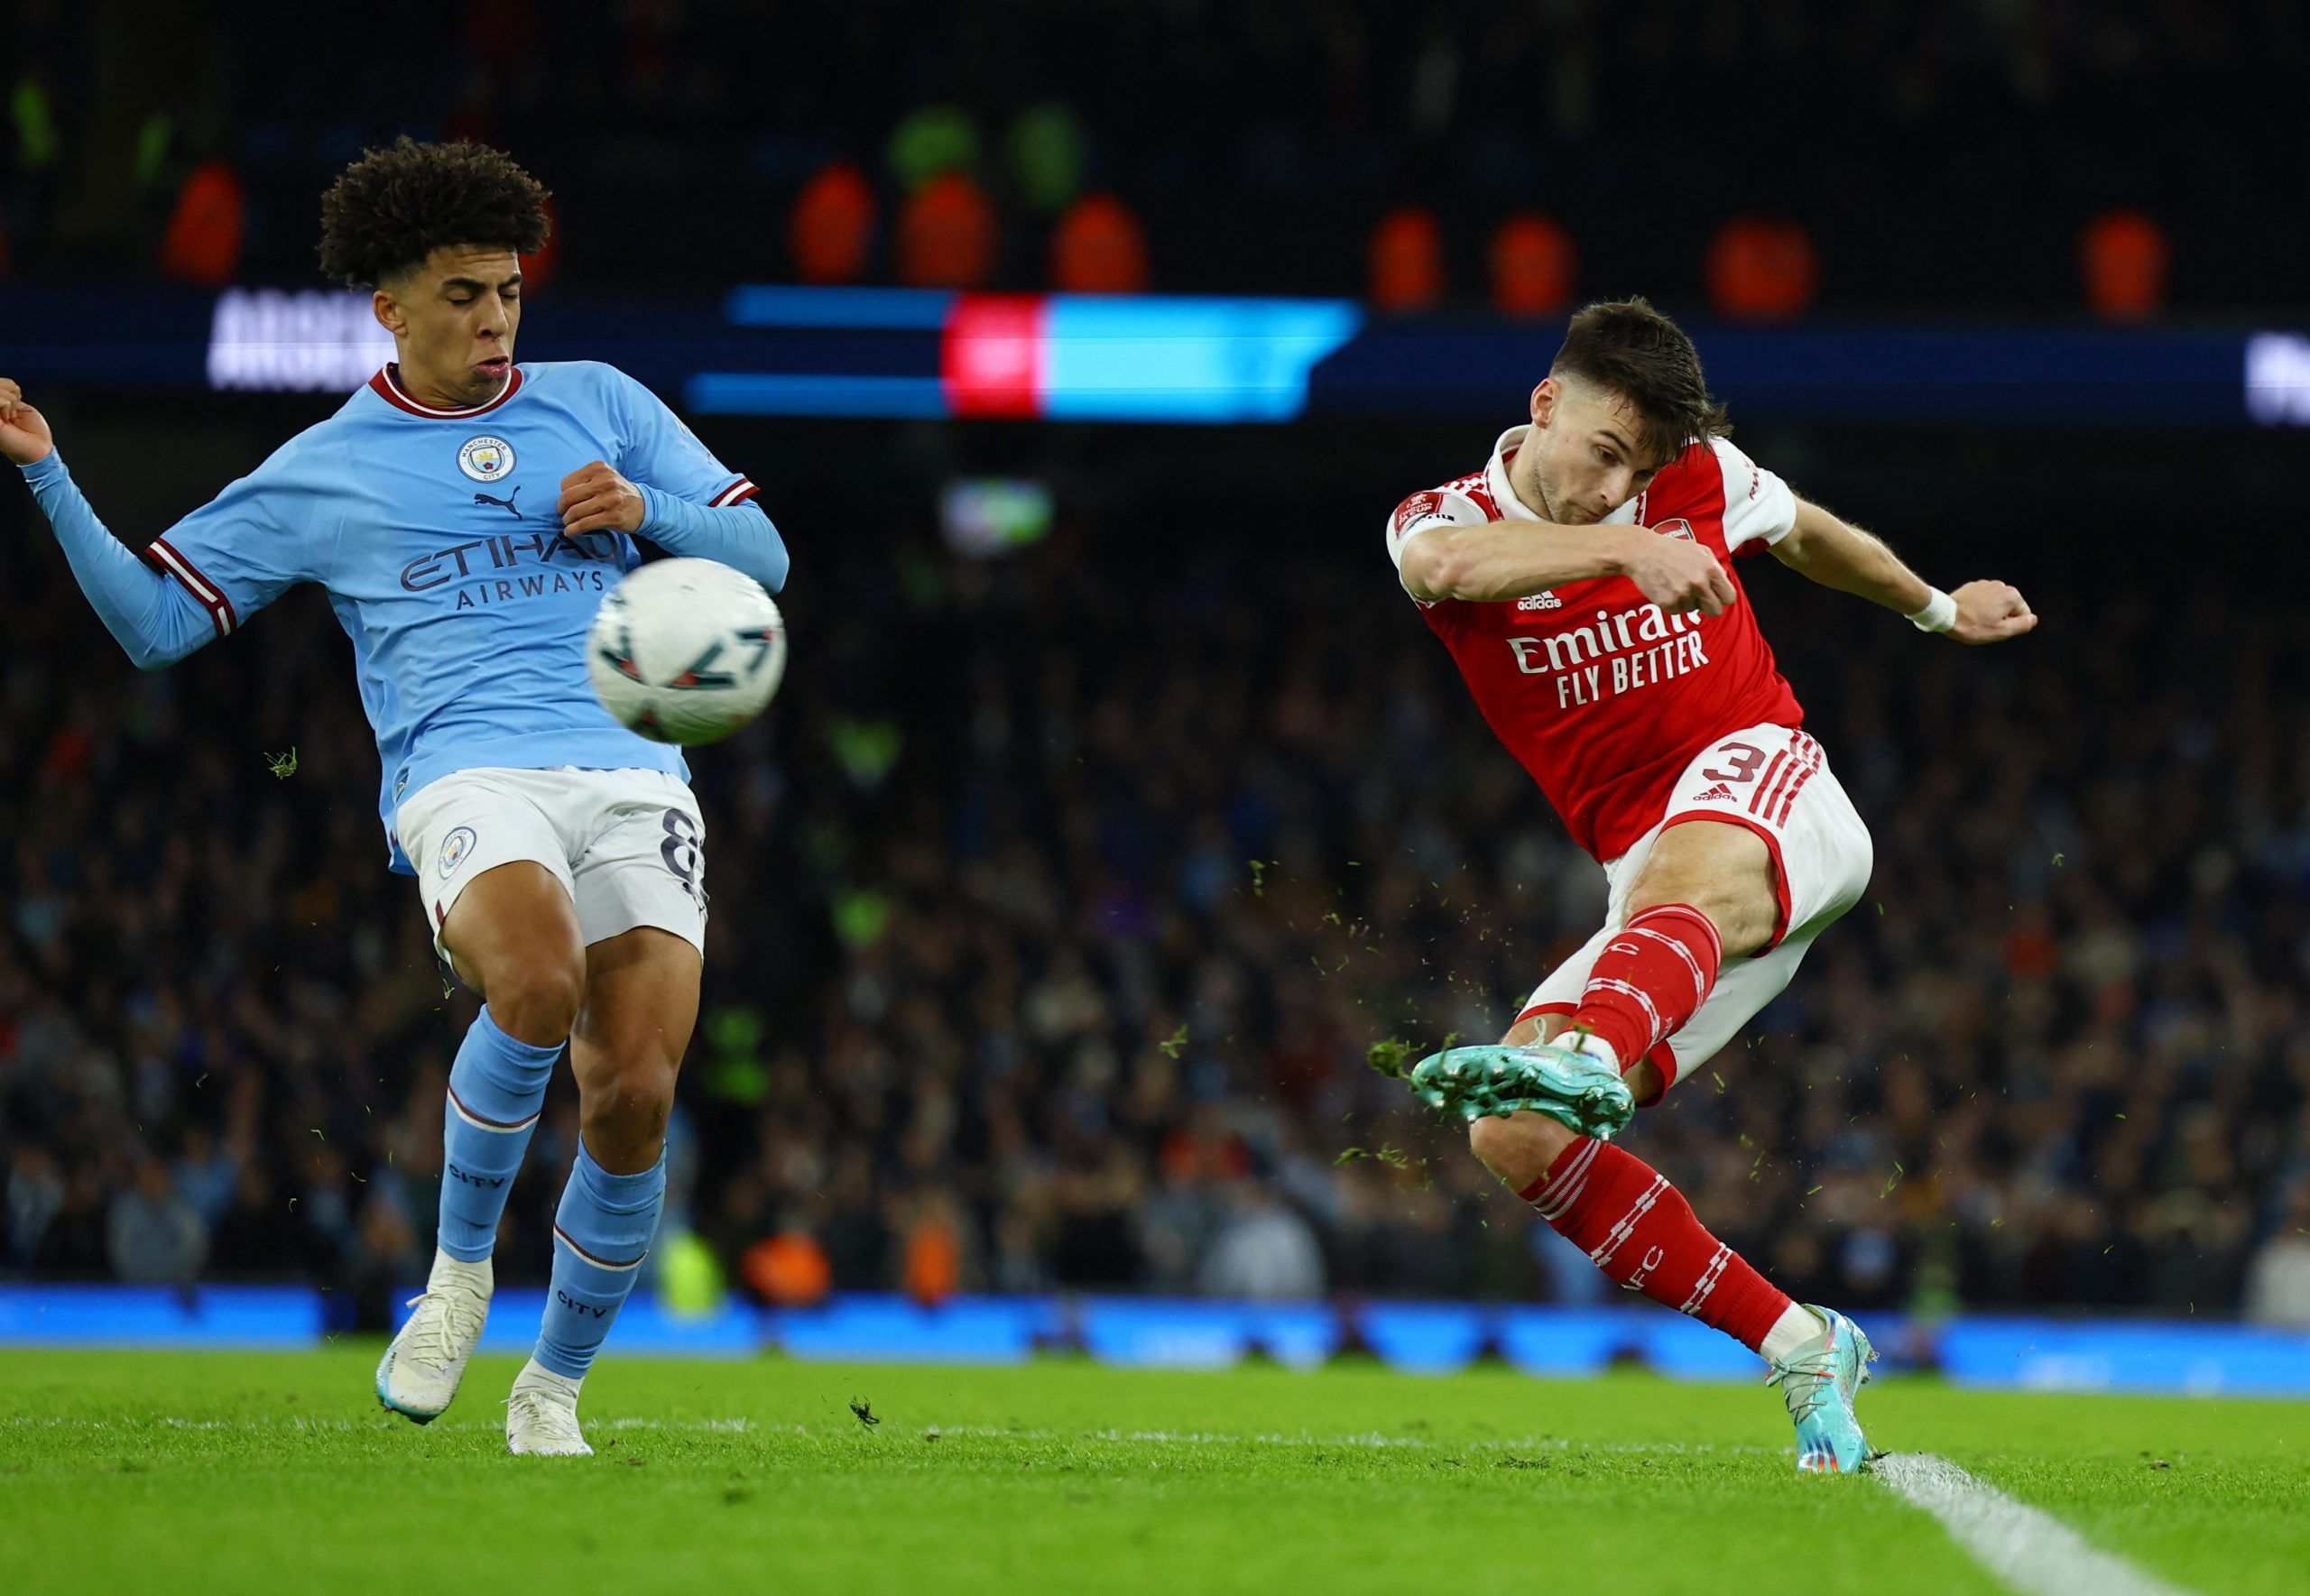 Soccer Football - FA Cup - Fourth Round - Manchester City v Arsenal - Etihad Stadium, Manchester, Britain - January 27, 2023 Arsenal's Kieran Tierney in action with Manchester City's Rico Lewis Action Images via Reuters/Molly Darlington